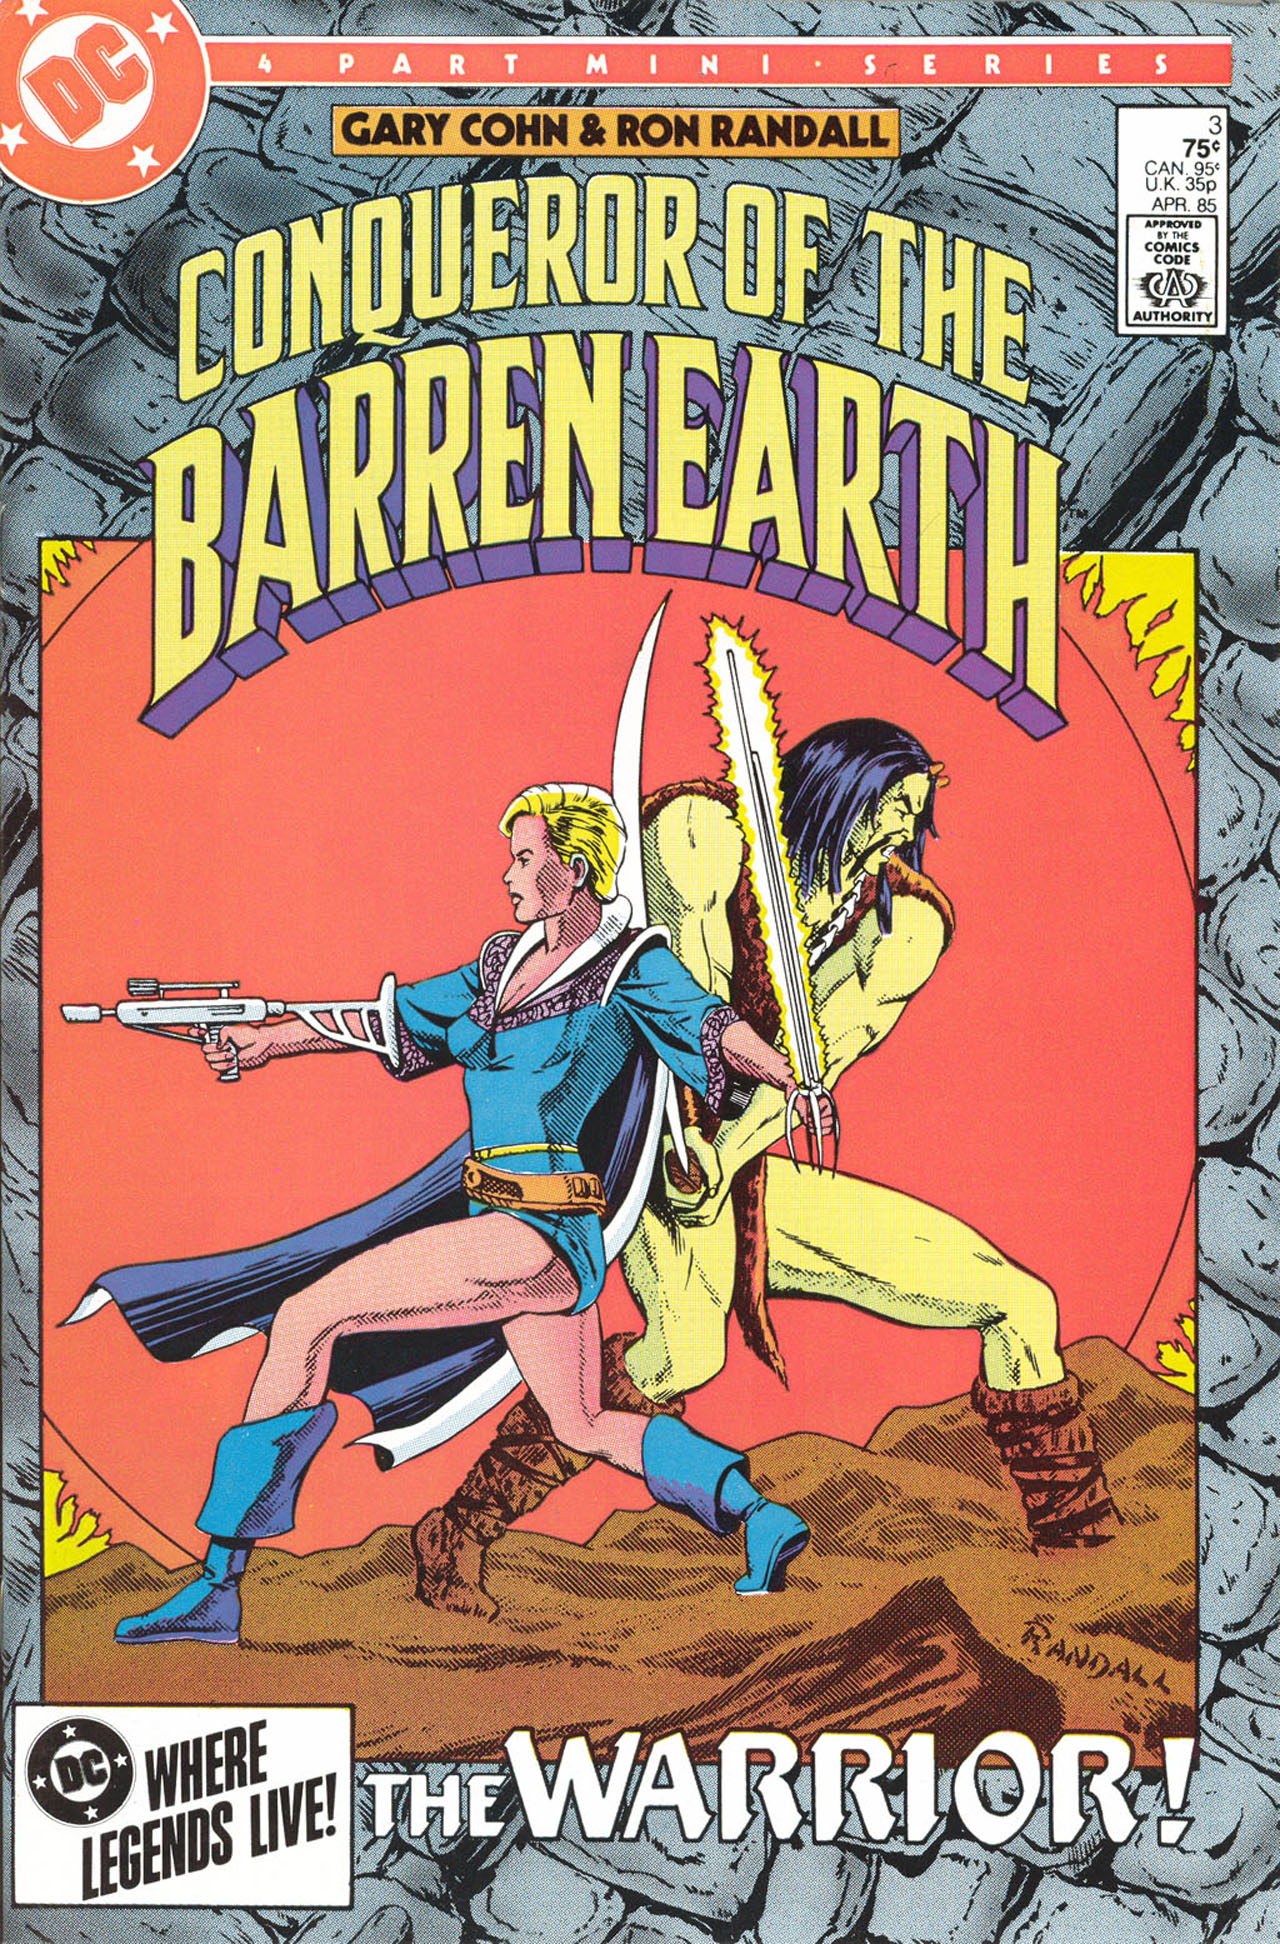 Read online Conqueror of the Barren Earth comic -  Issue #3 - 1